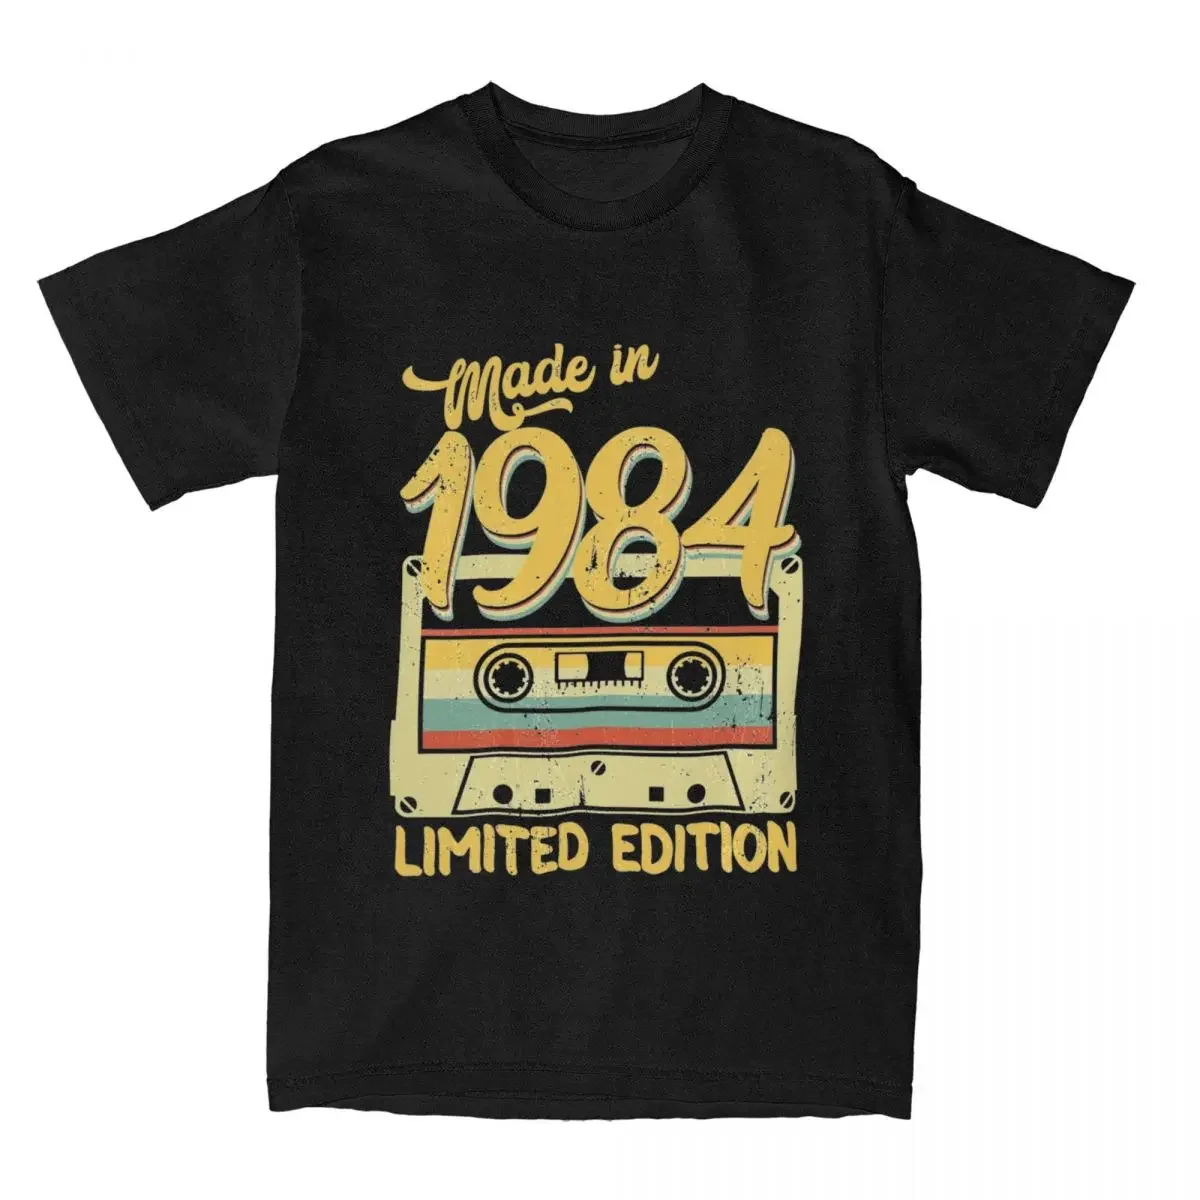 

Made In 1984 Limited Graphic T-shirts for Men Clothing Women Short Sleeve Tees New Arrivals Unisex Summer